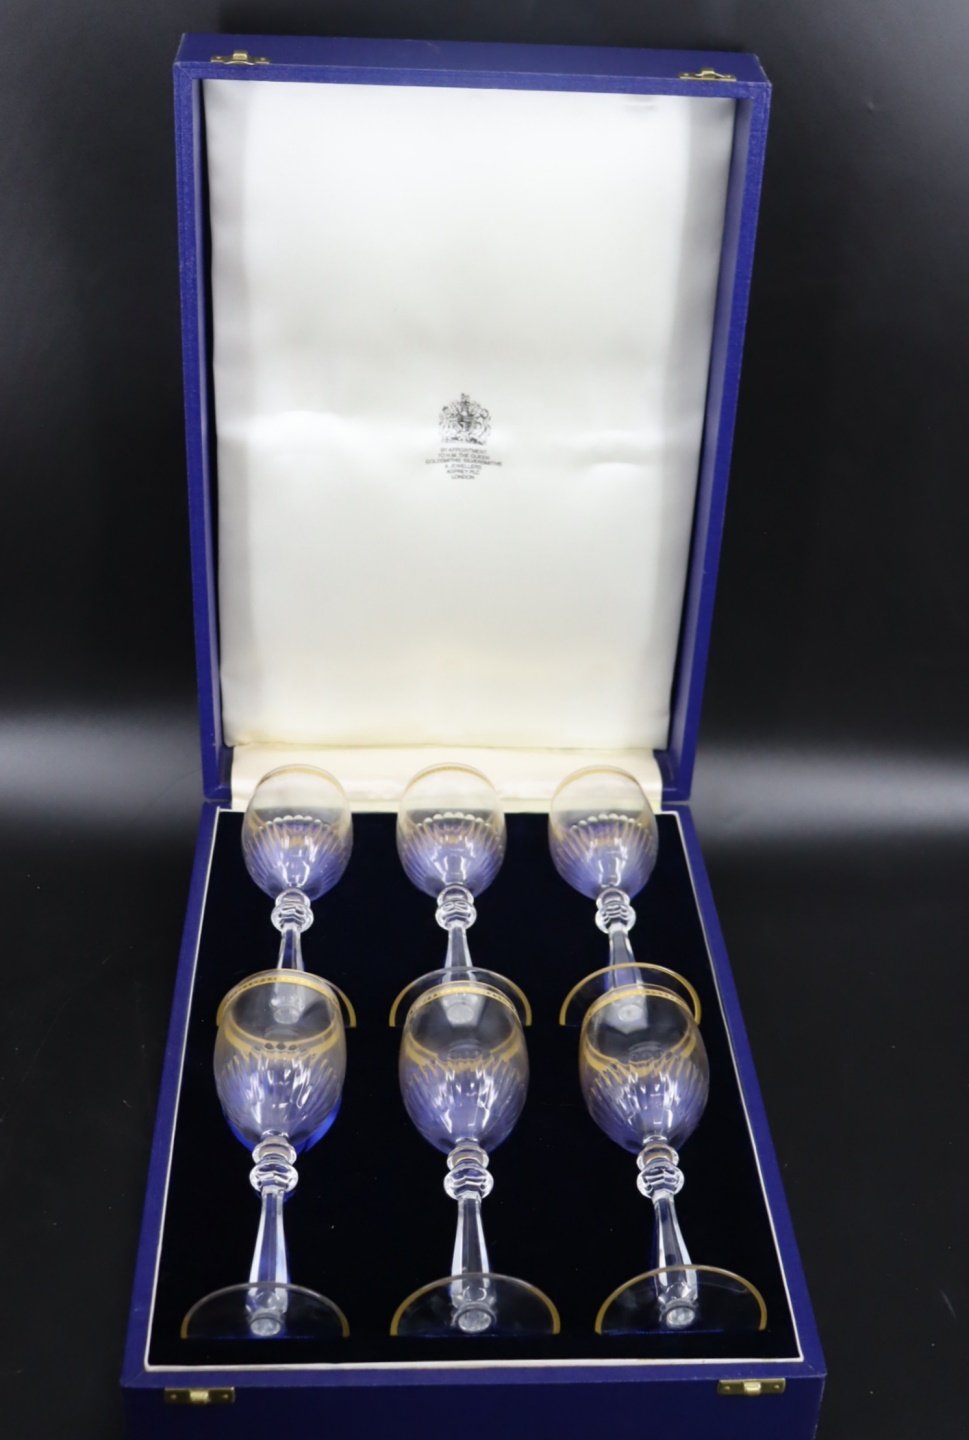 6 BACCARAT GLASSES. Signed and